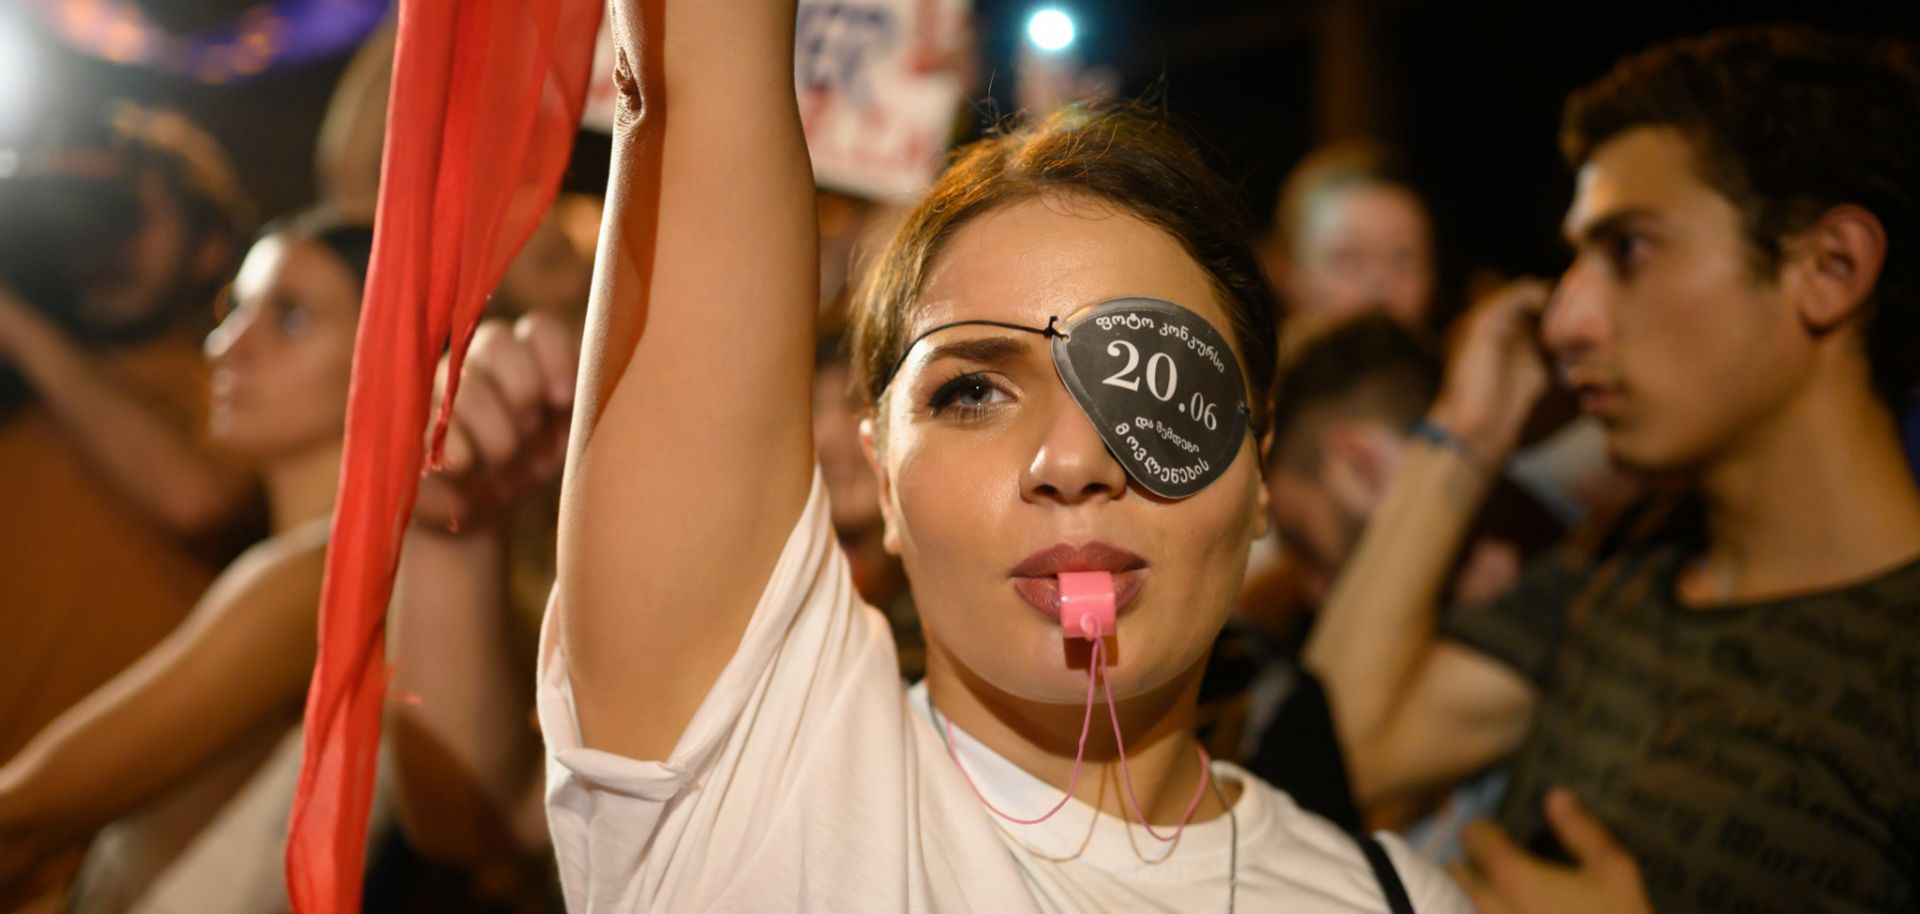 A woman raises her flag and blows a whistle at Georgia's Parliament building. She wears an eye patch to protest the dispersal of a previous demonstration.